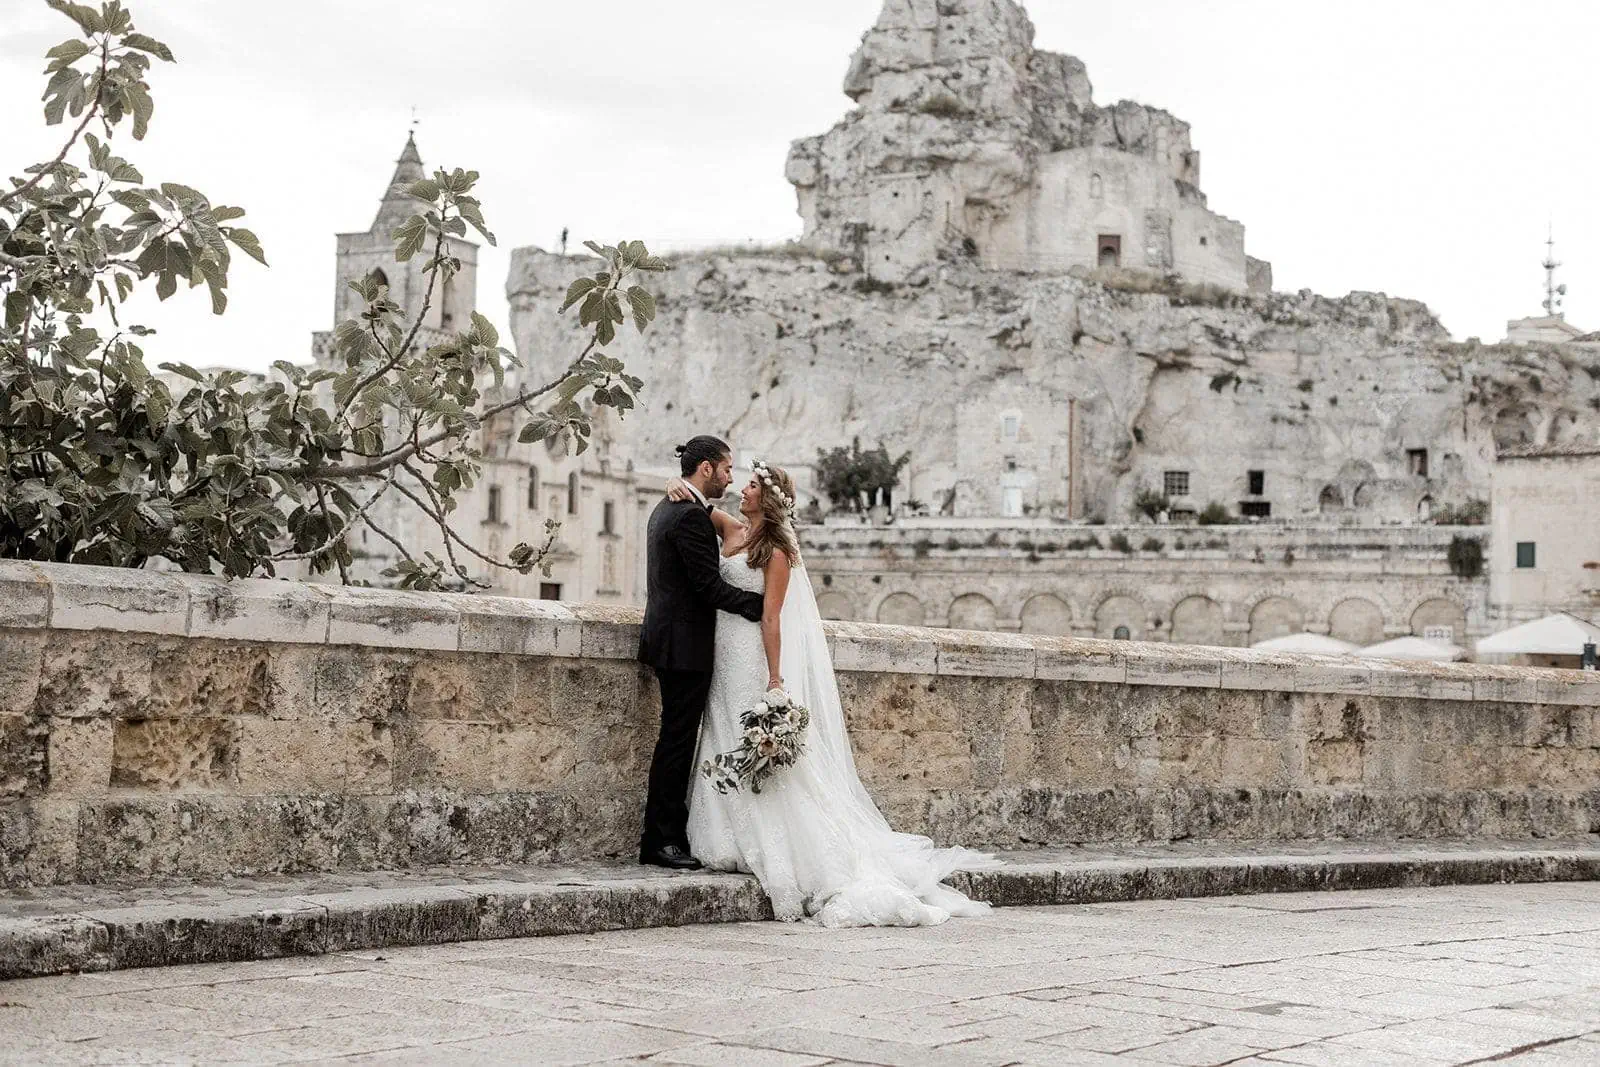 Bride and groom embrace outside in Matera Italy after elopement ceremony